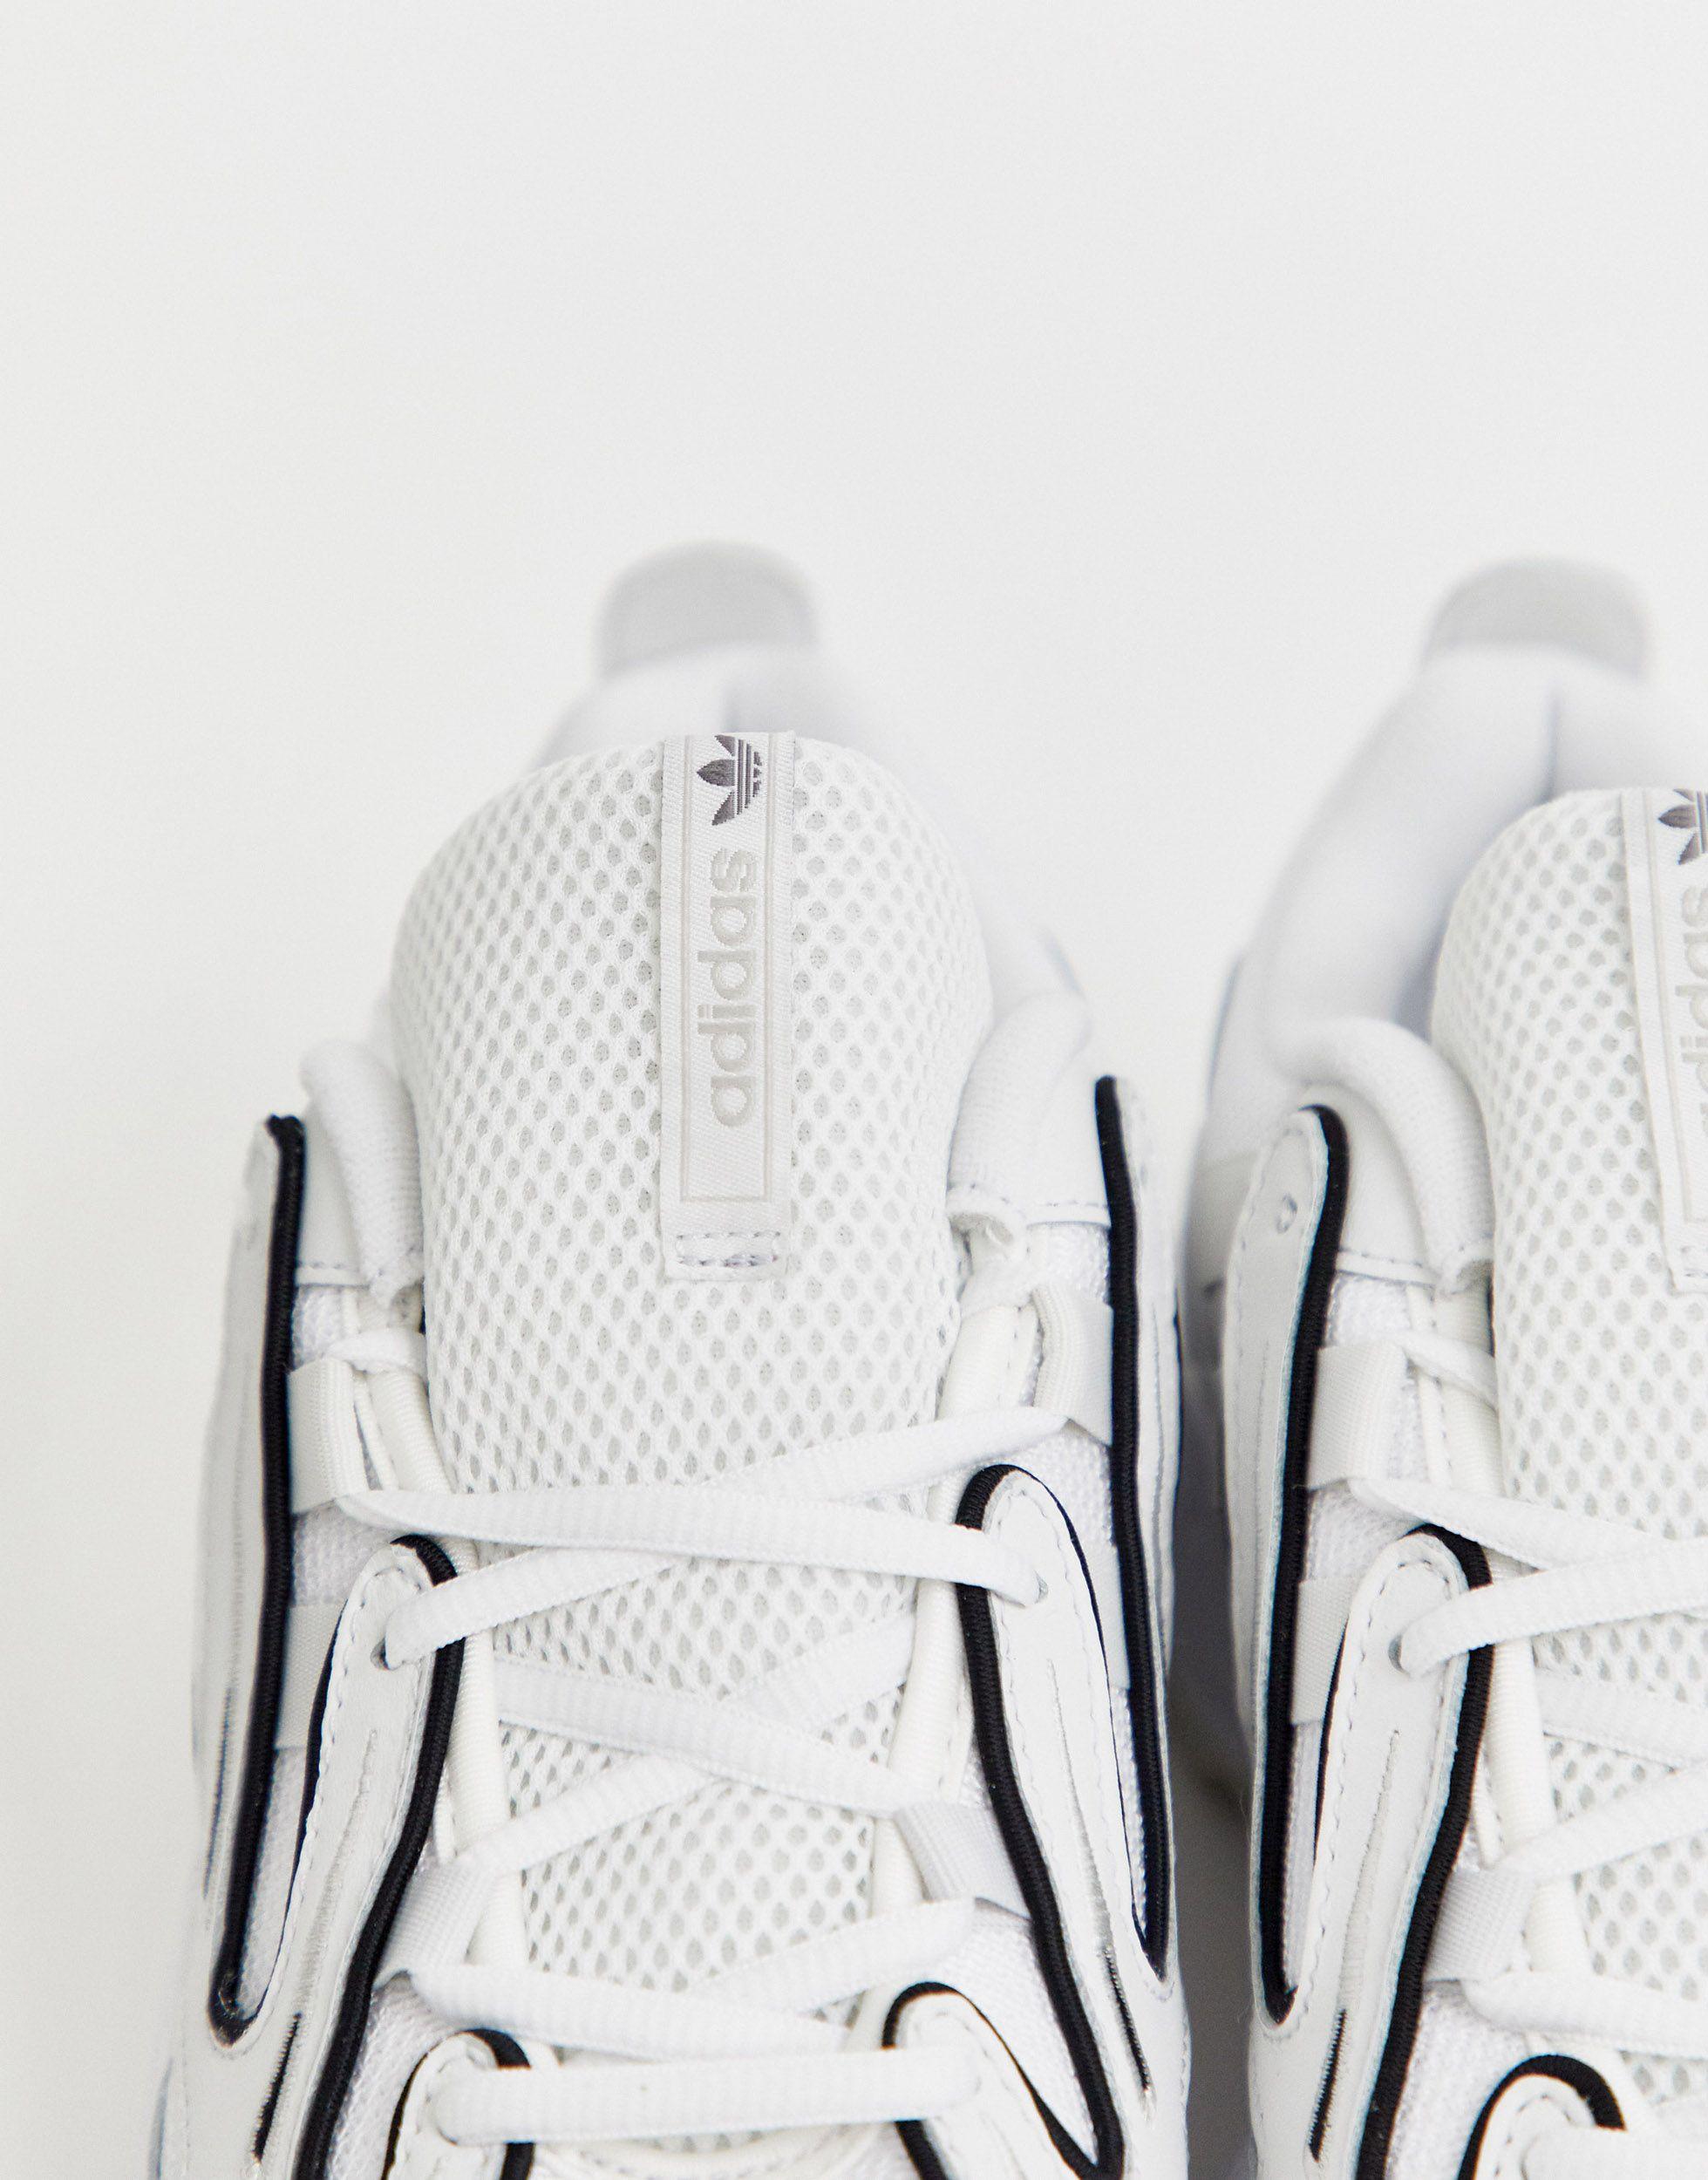 adidas Originals Rubber Eqt Gazelle Sneakers in White | Lyst